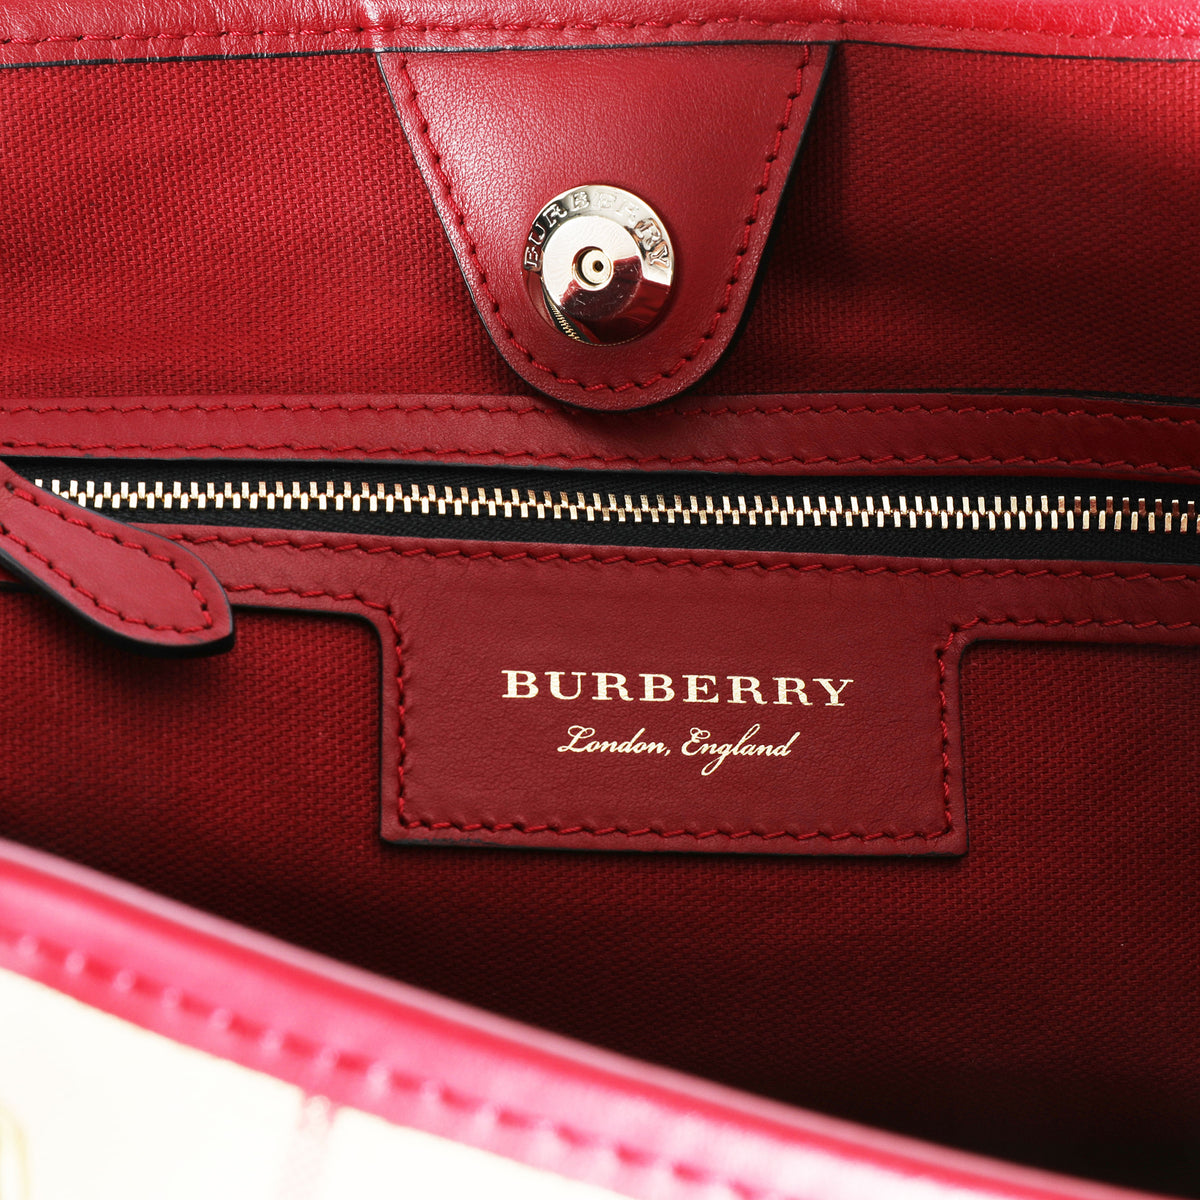 BURBERRY tote bag red leather CANTERBURY grained check with pouch